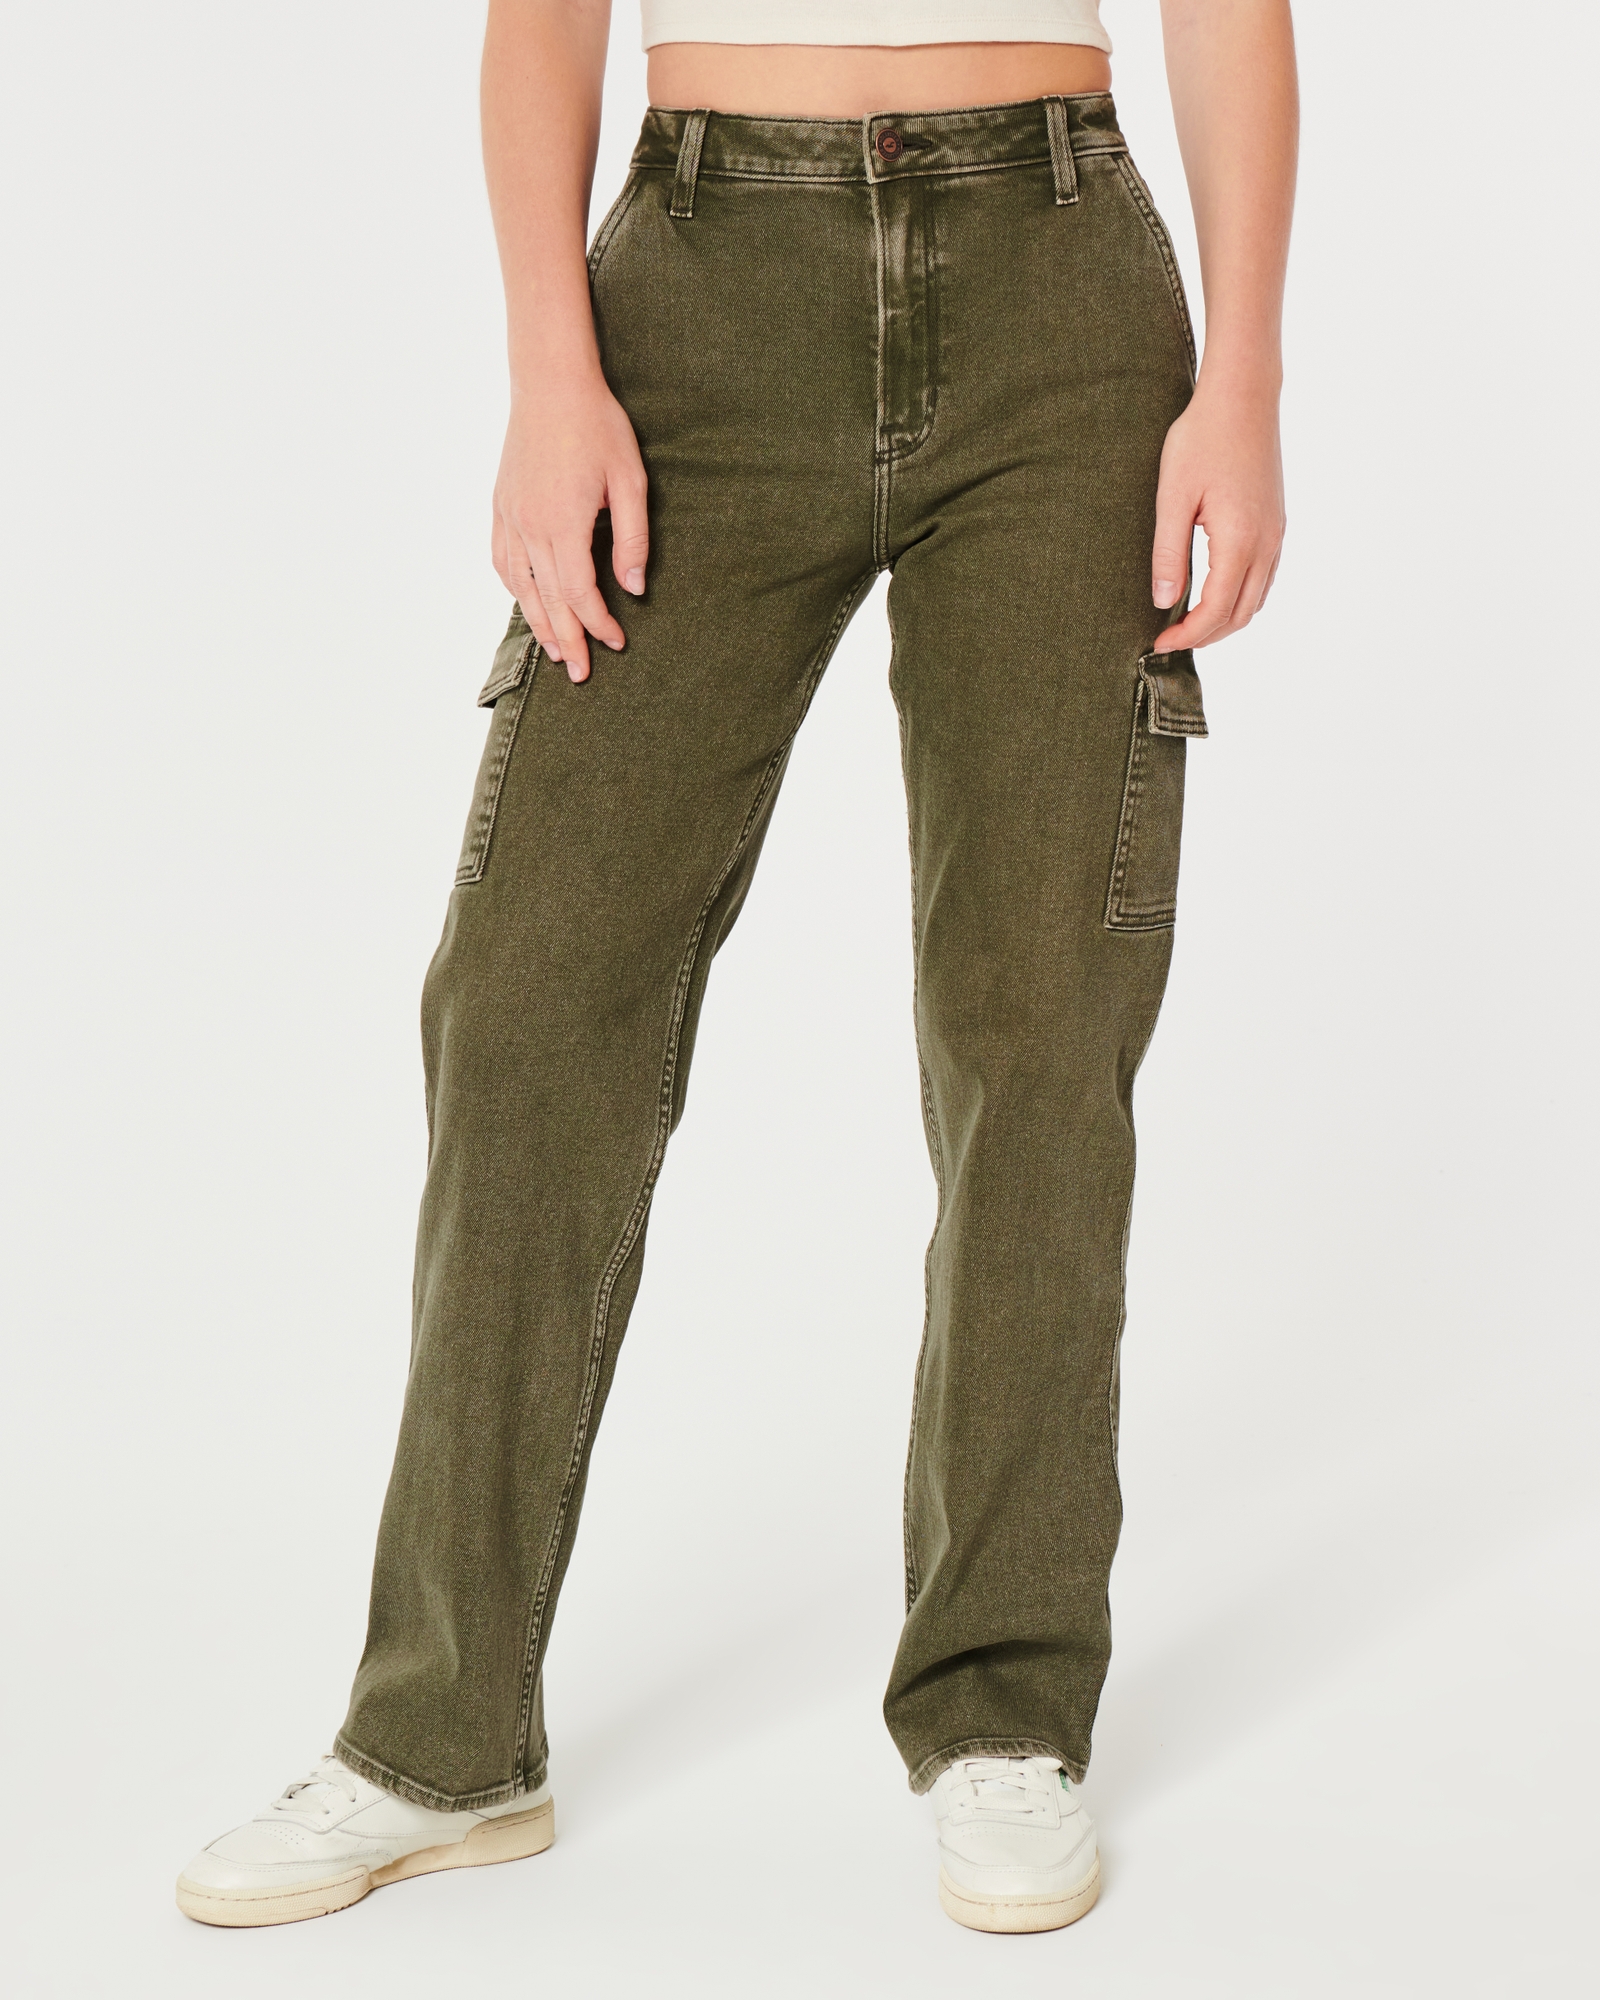 Women's Ultra High-Rise Olive Green Cargo Dad Jeans in Olive Green Size 2-L/3-L/26W from Hollister